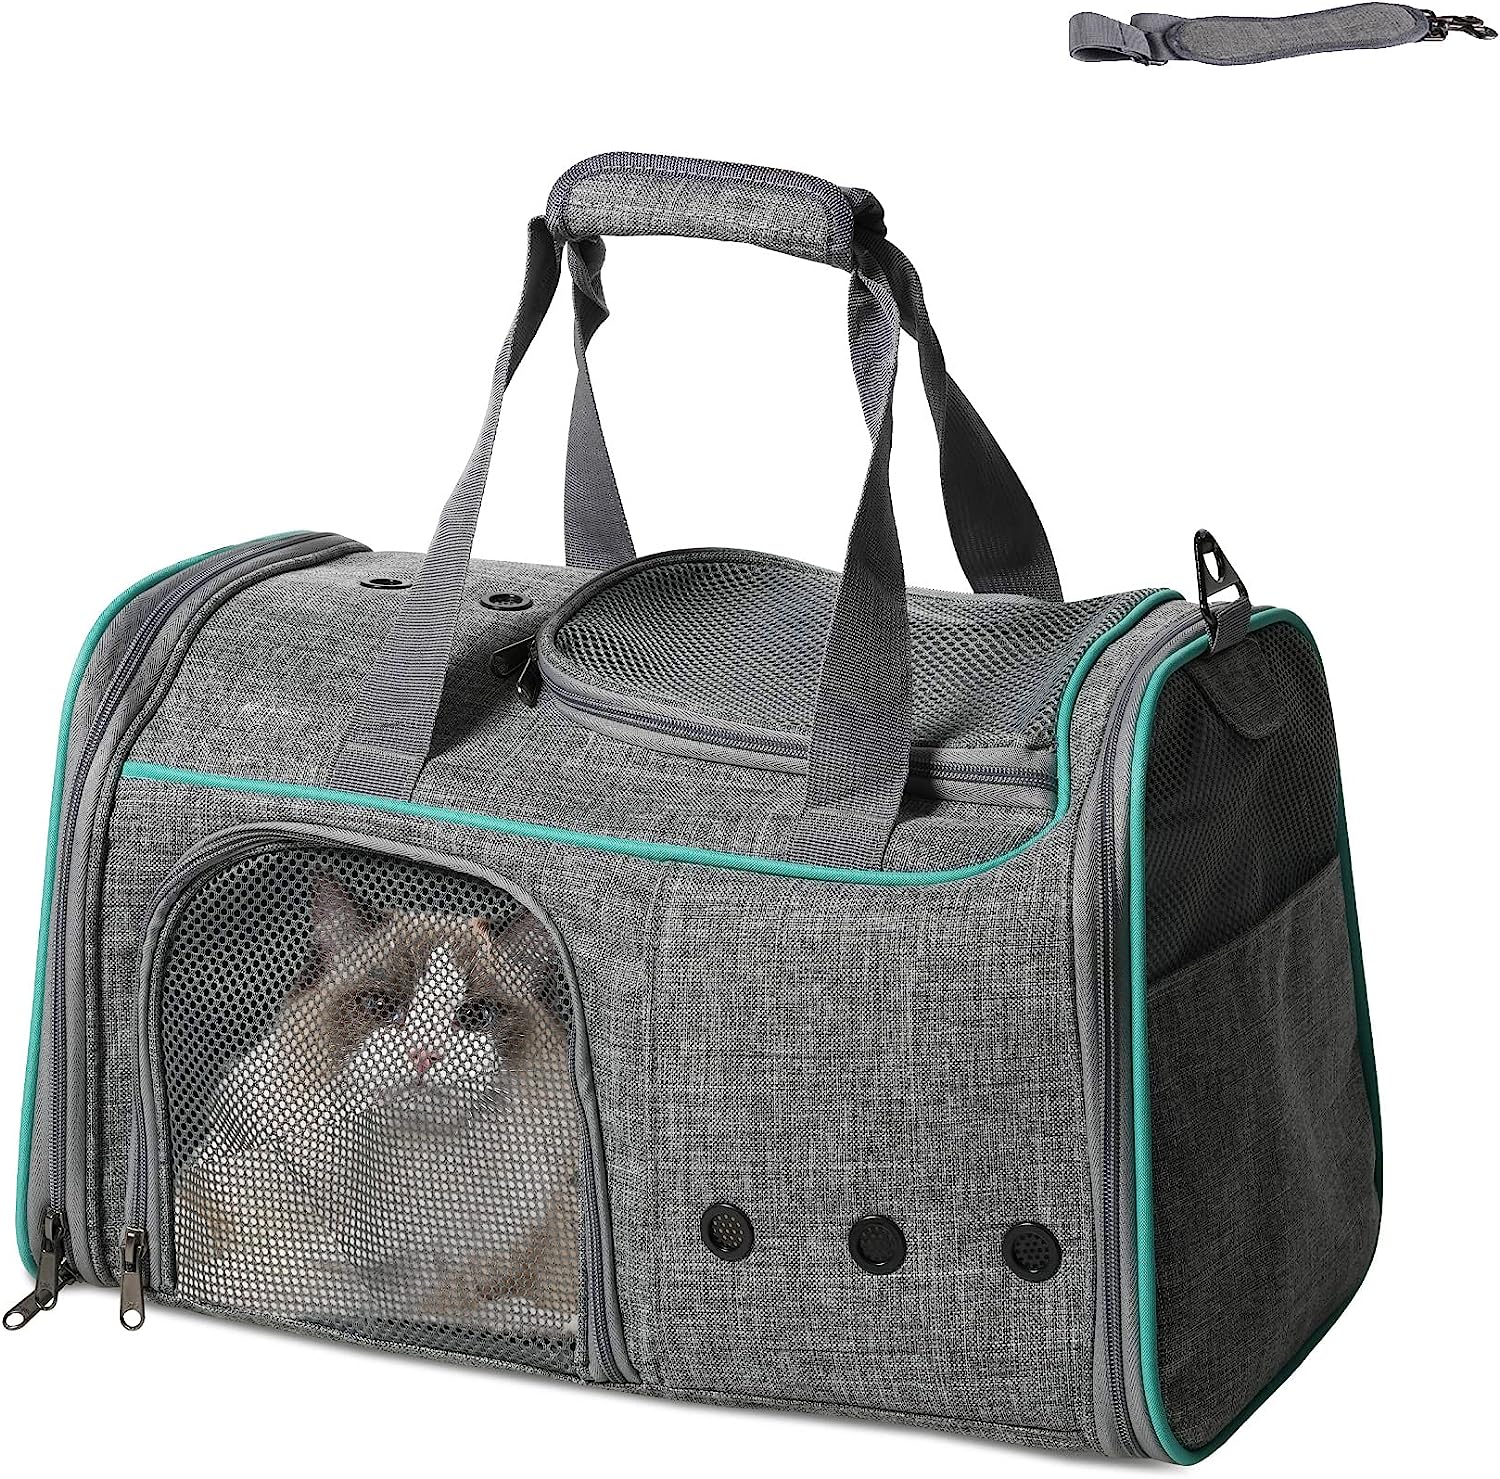 Airline Approved Pet Carrier for Cats Dogs Puppies Up to 16.5lbs with Breathable Mesh & Safe Locking Zippers